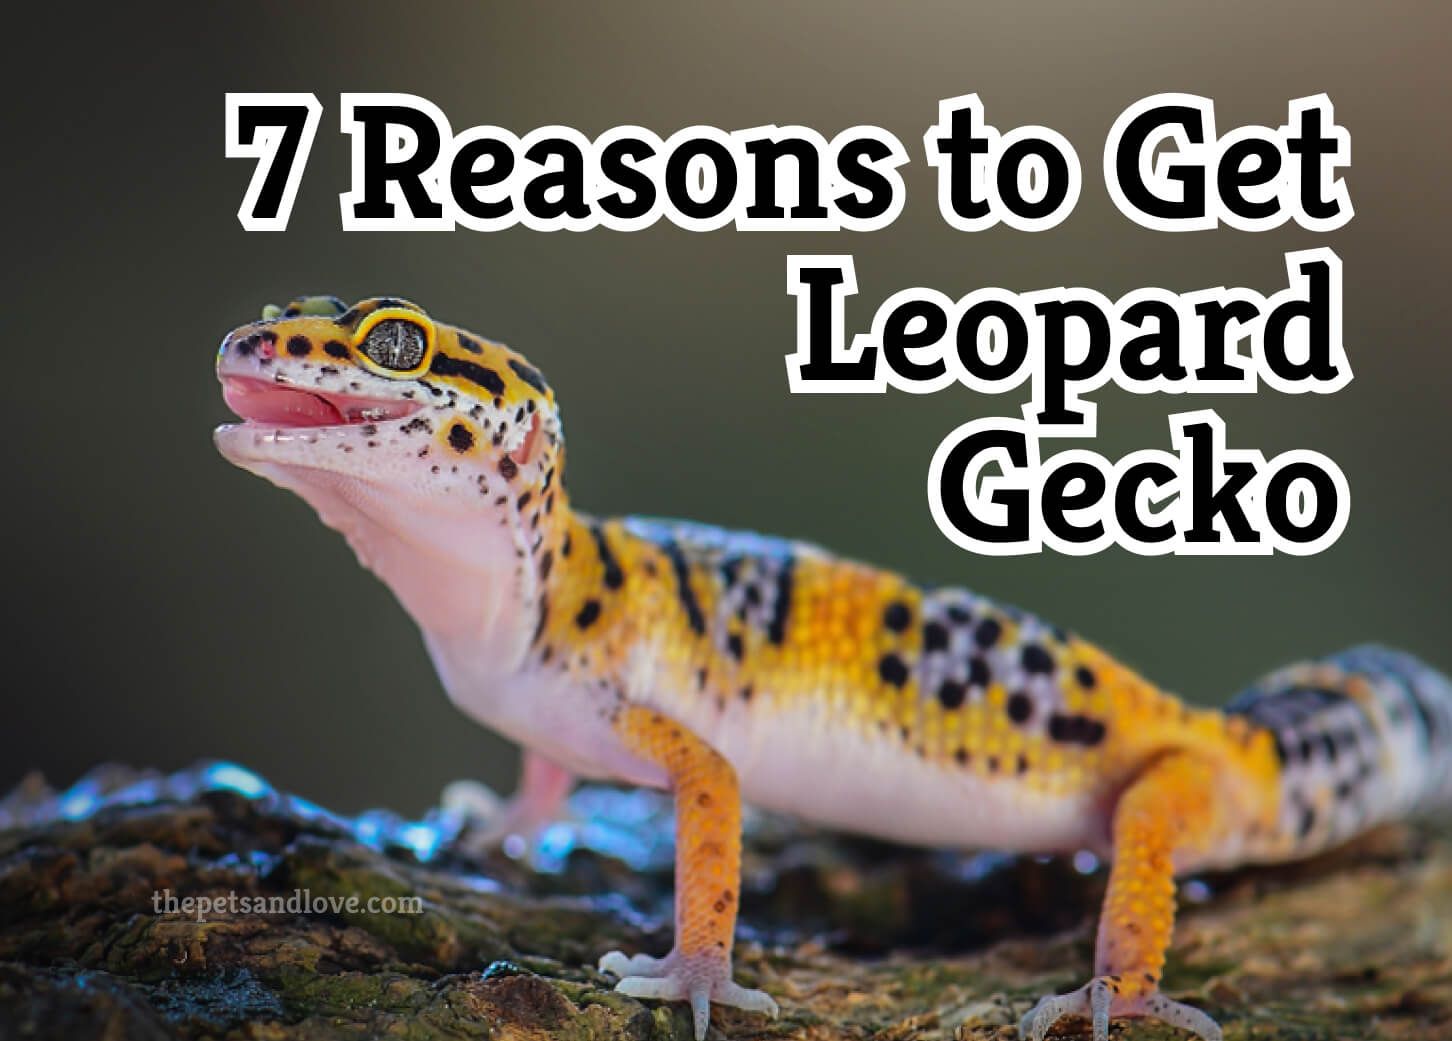 7 Reasons Why You Should Get a Leopard Gecko as Your Pet